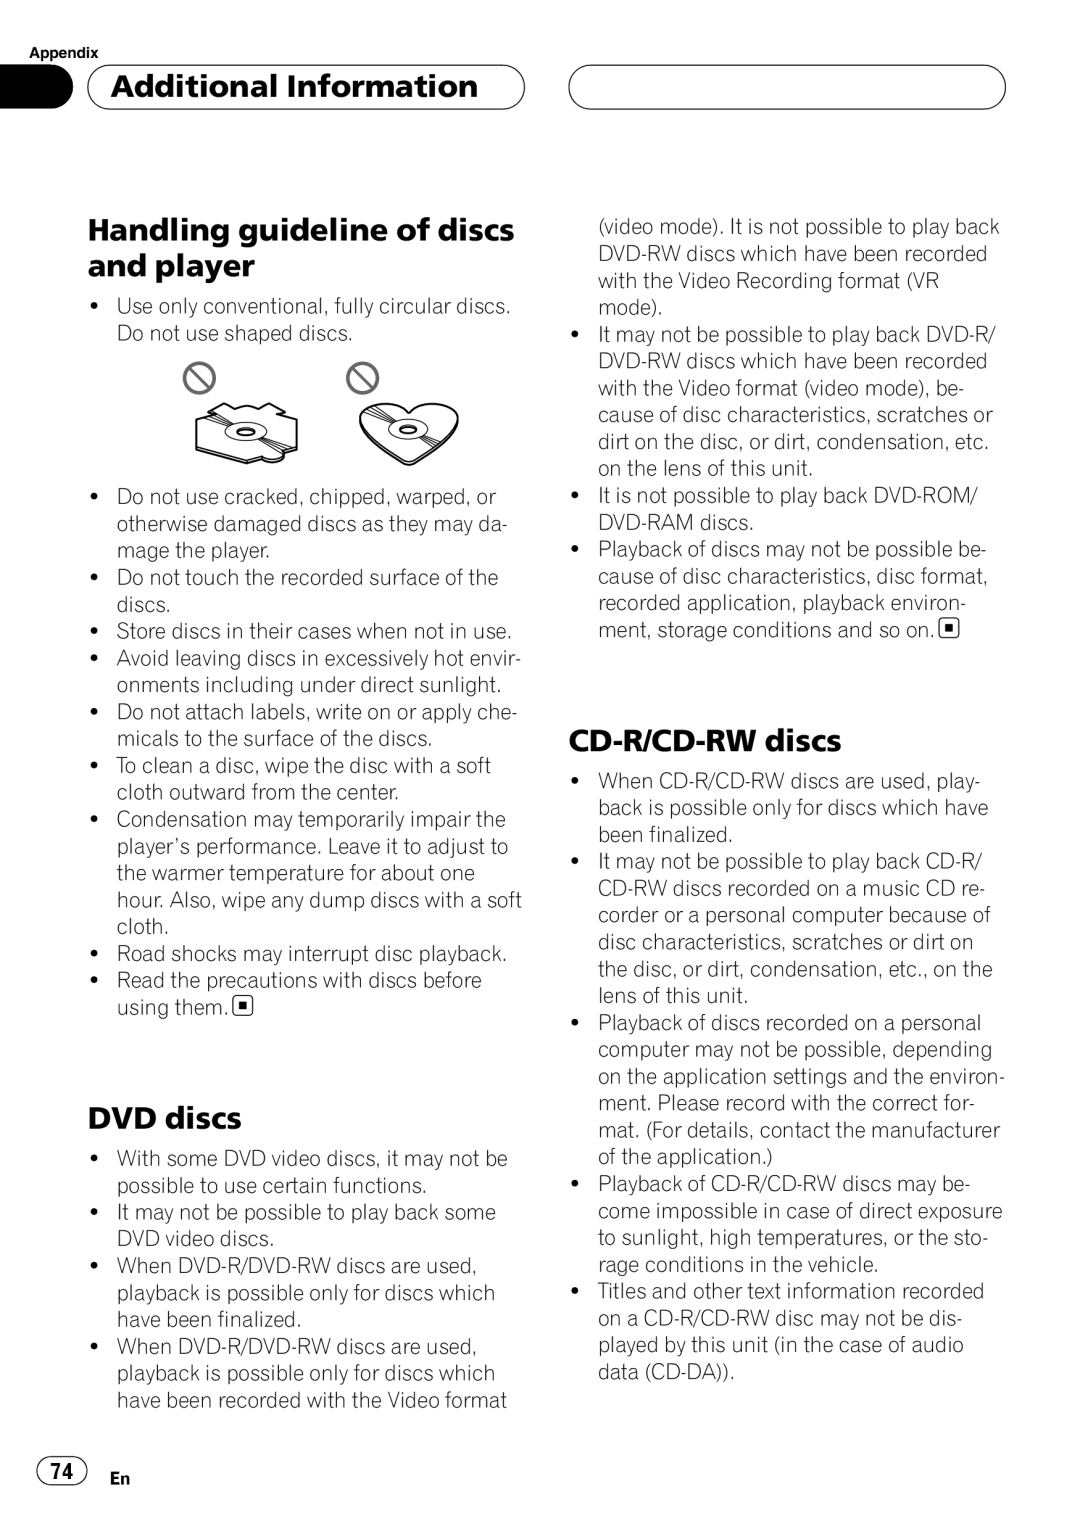 Pioneer AVH-P4900D Additional Information Handling guideline of discs and player, DVD discs, CD-R/CD-RW discs 